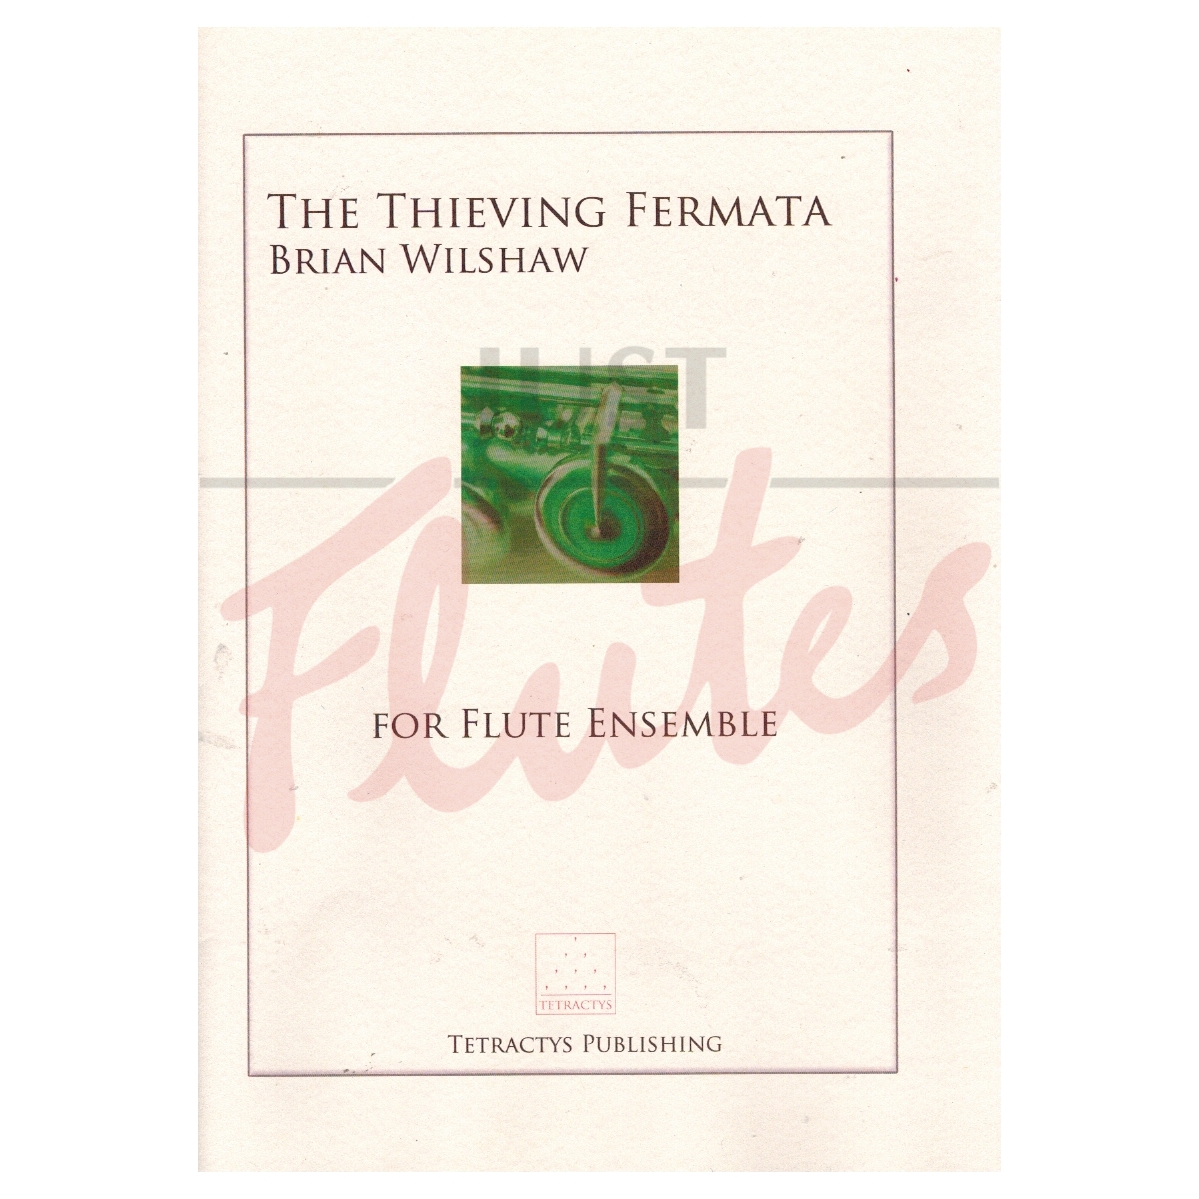 The Thieving Fermata (The five eight mantra)